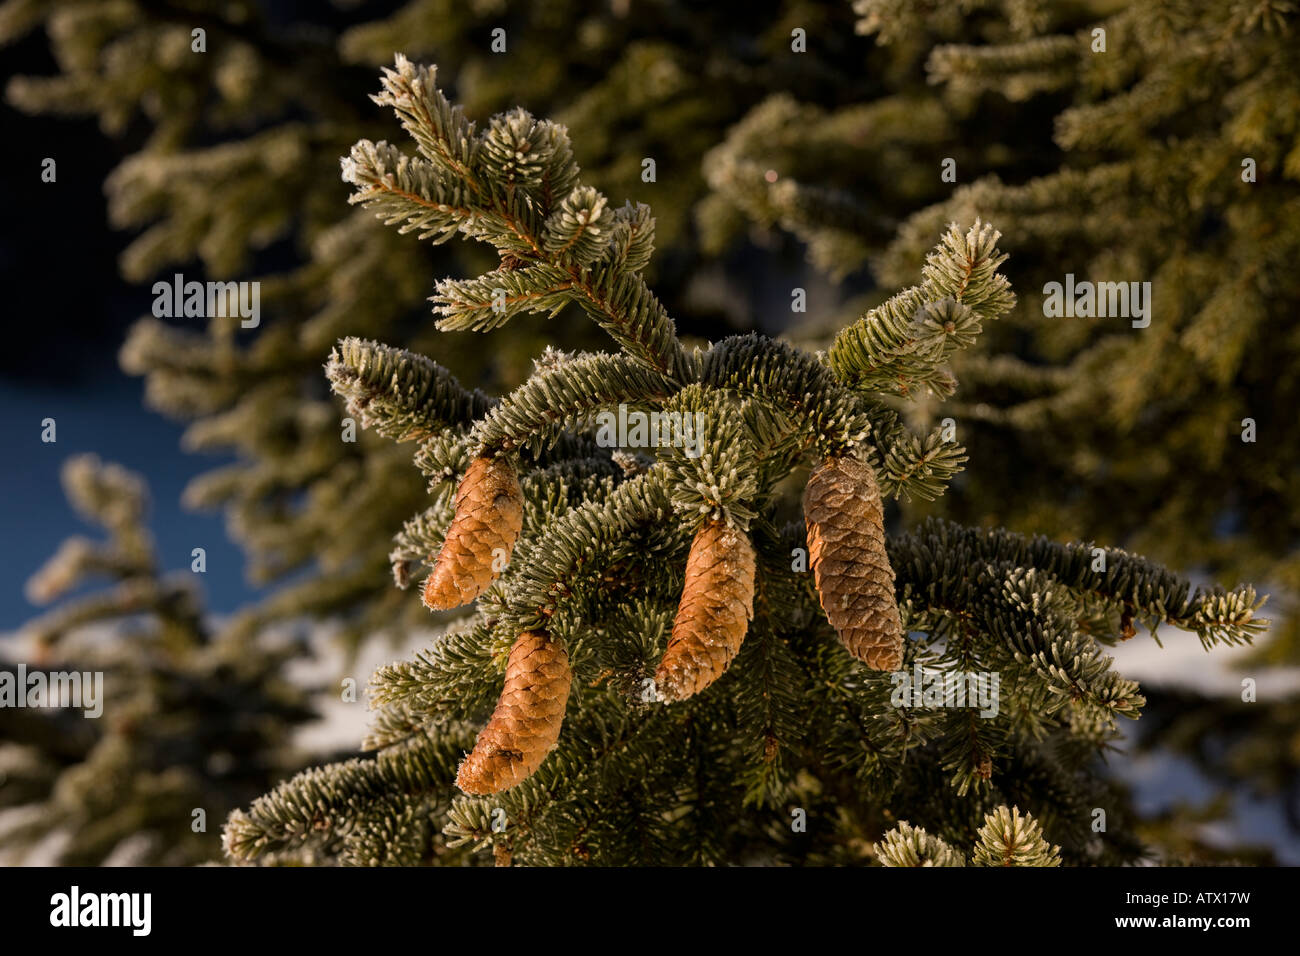 Norway Spruce, Picea abies, in winter with cones; Christmas tree. Jura Mountains East France Stock Photo